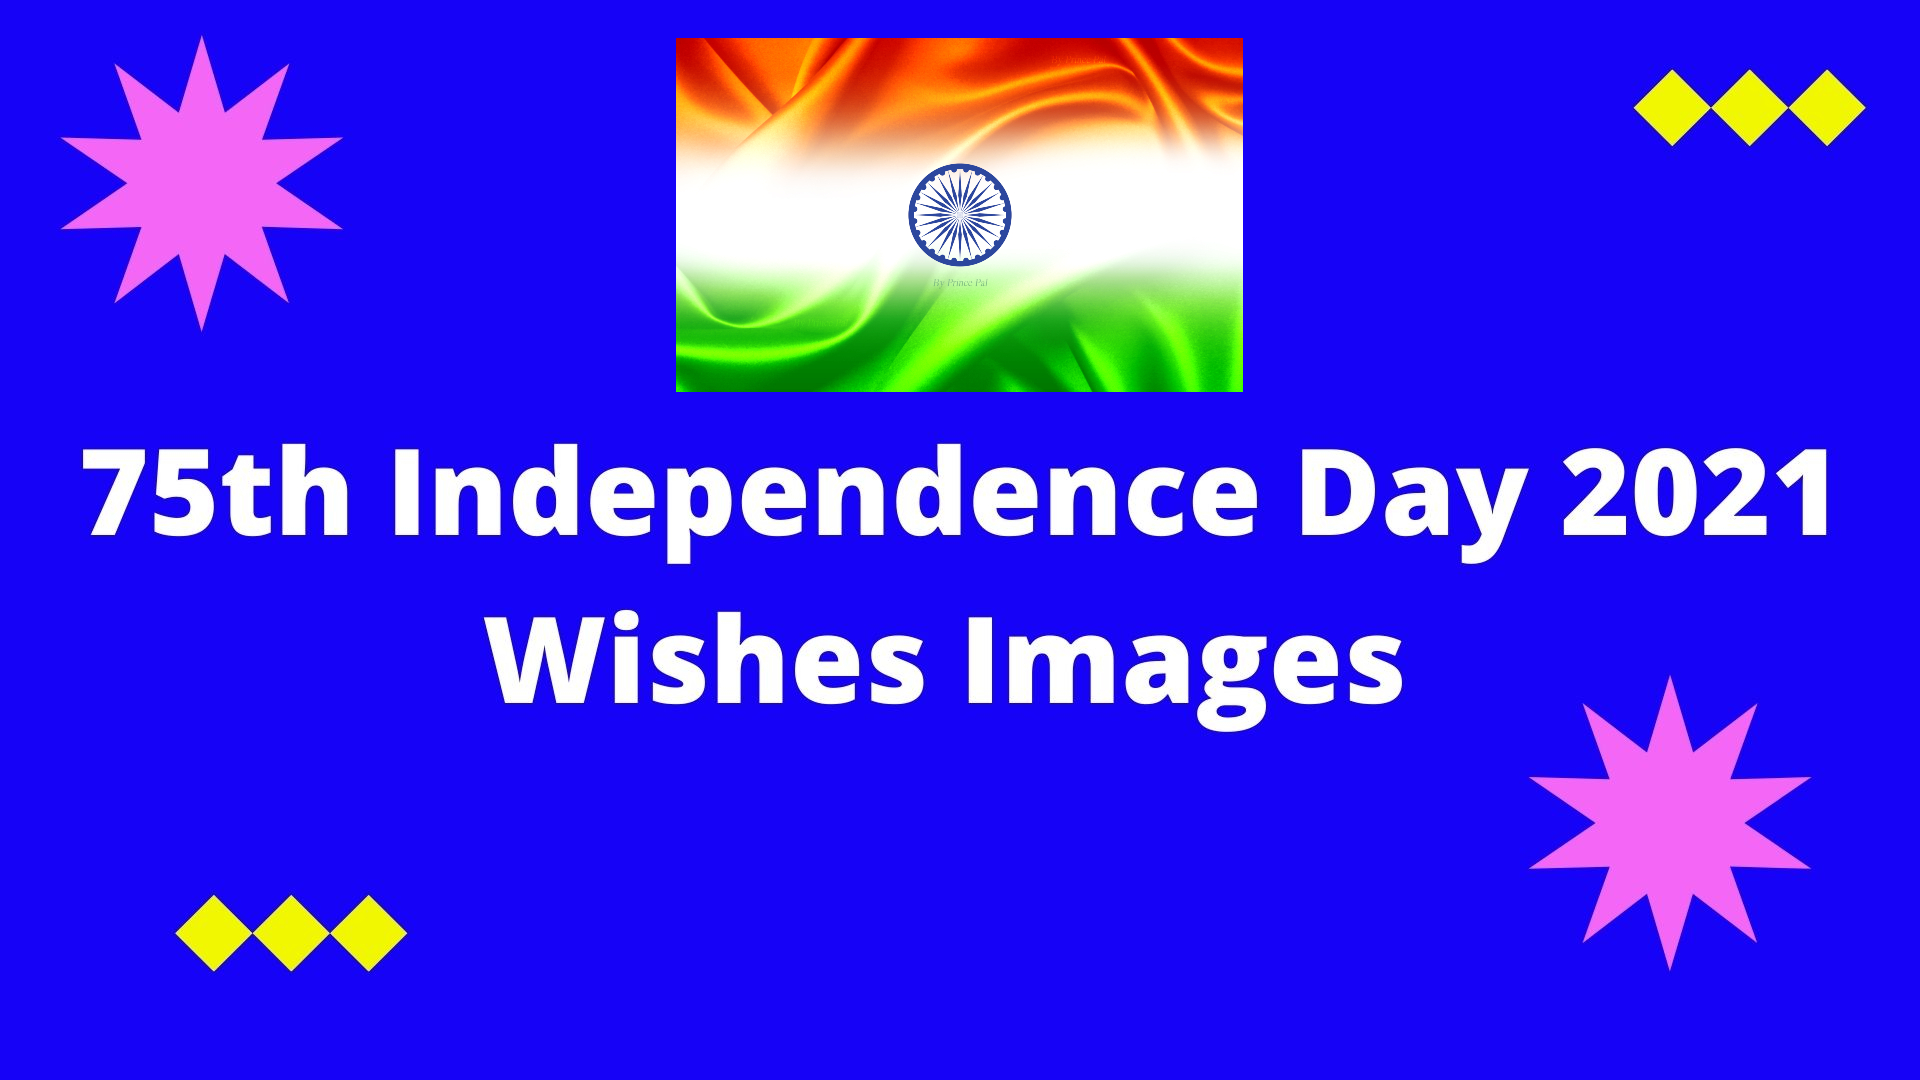 75th Independence Day 2021 Wishes Images with Shayari